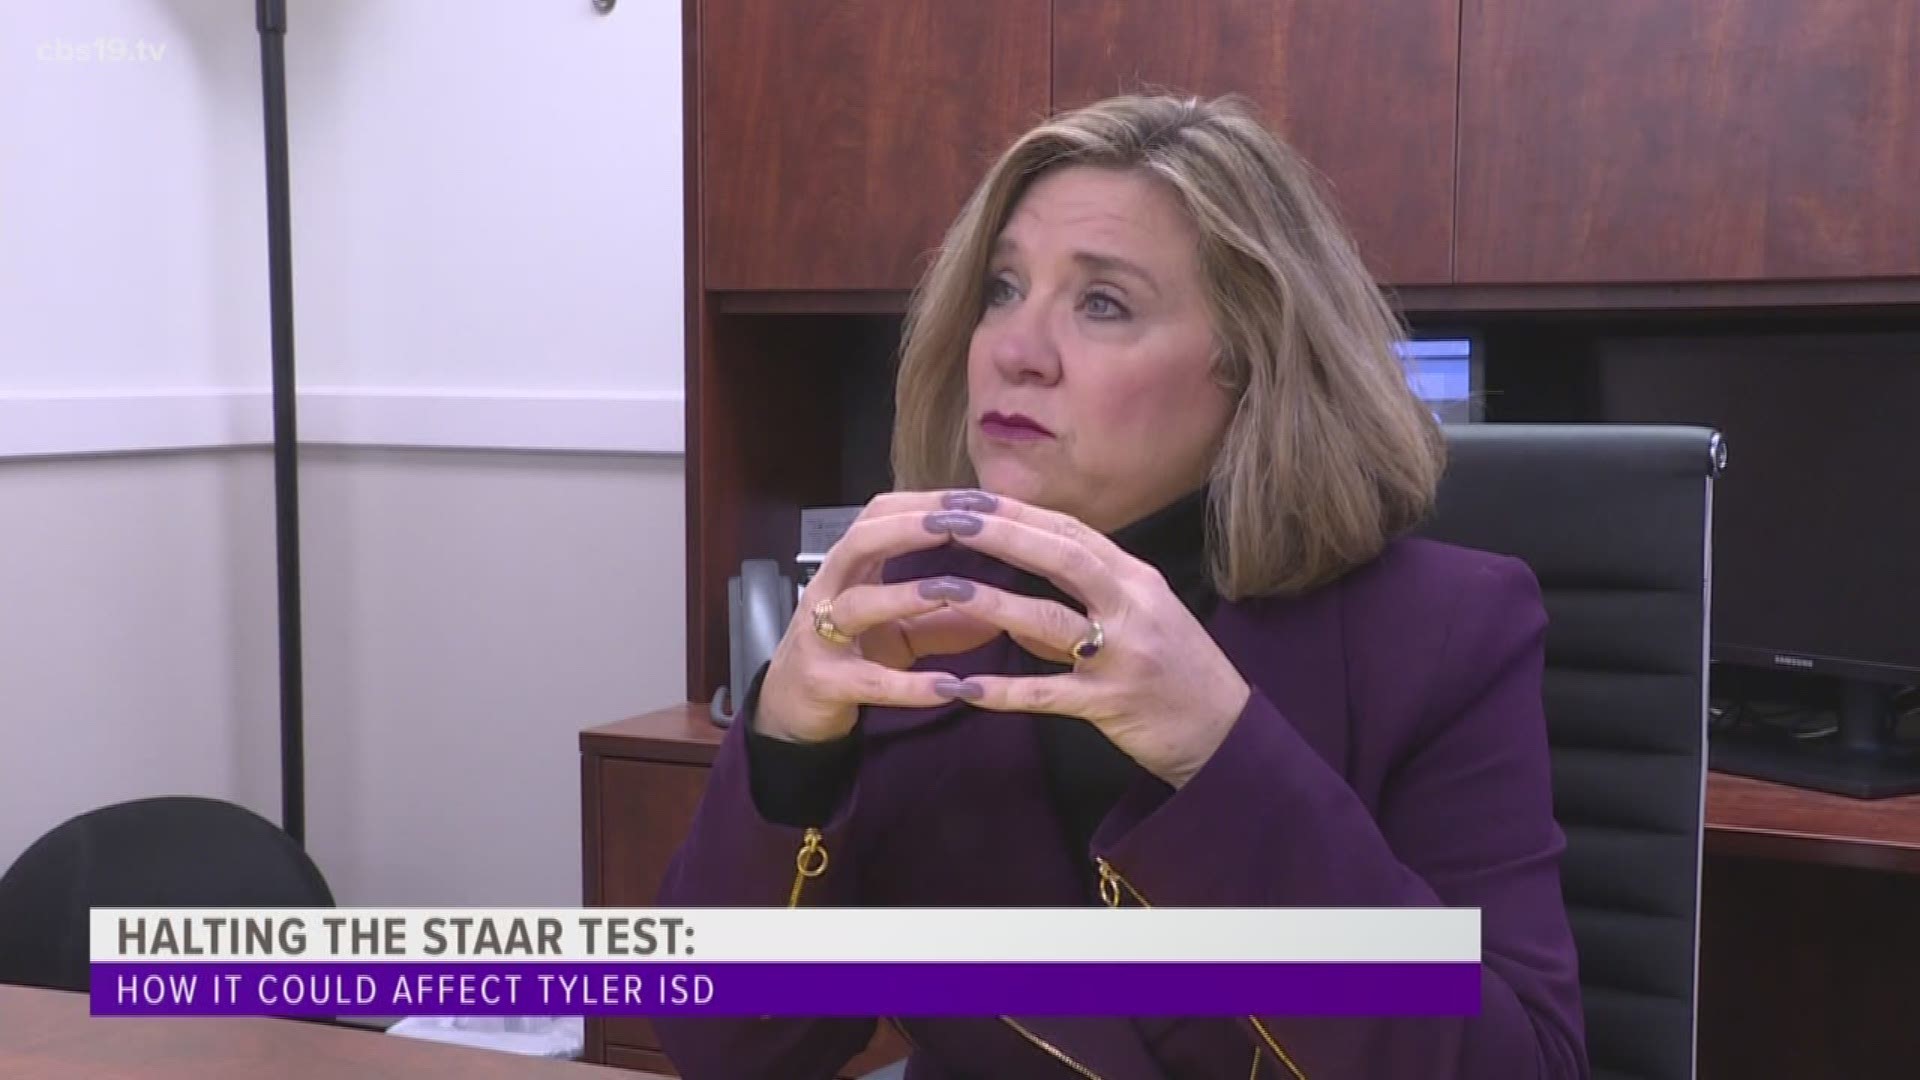 Christy Hanson, TISD superintendent of curriculum and instruction, discusses how halting the STAAR test could impact the district.